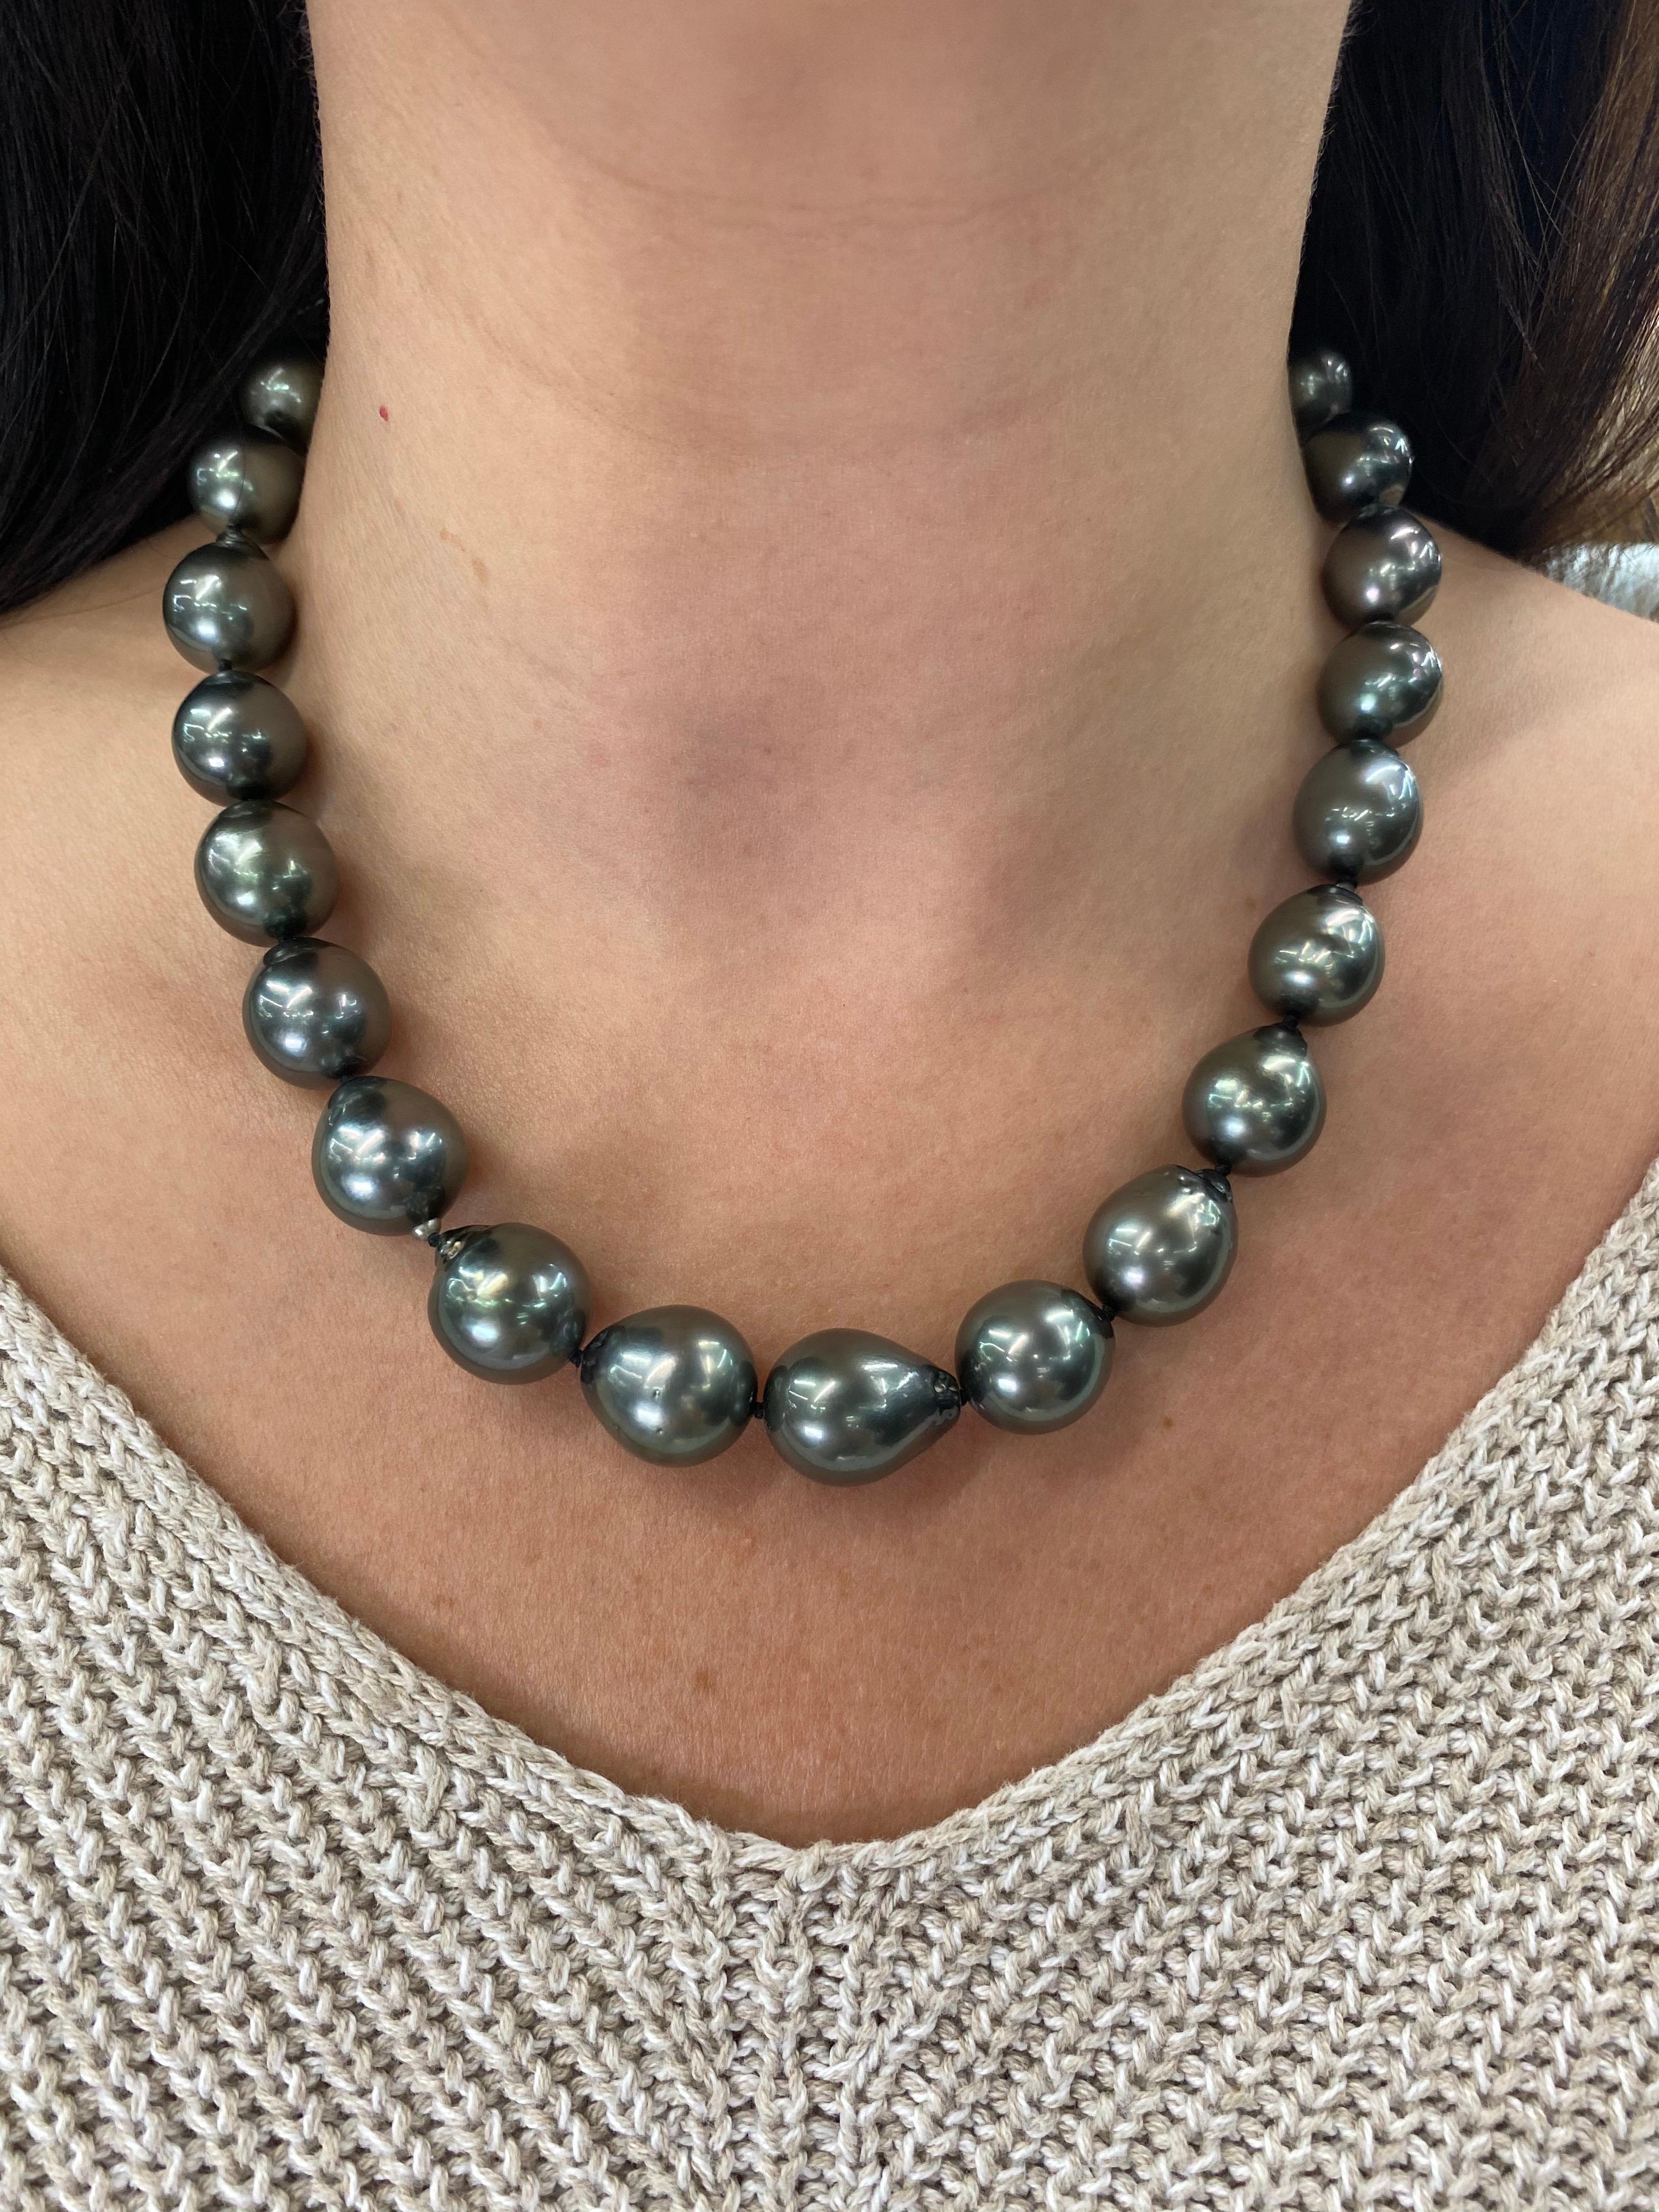 Perfectly matched pearl strand necklace featuring 27 Tahitian baroque pearls measuring 12-14.9 mm with a high polish ball clasp in 14K White Gold. 

Pearl quality: AAA
Pearl Luster: AAA Excellent
Nacre : Very Thick

Strand can be made to order,